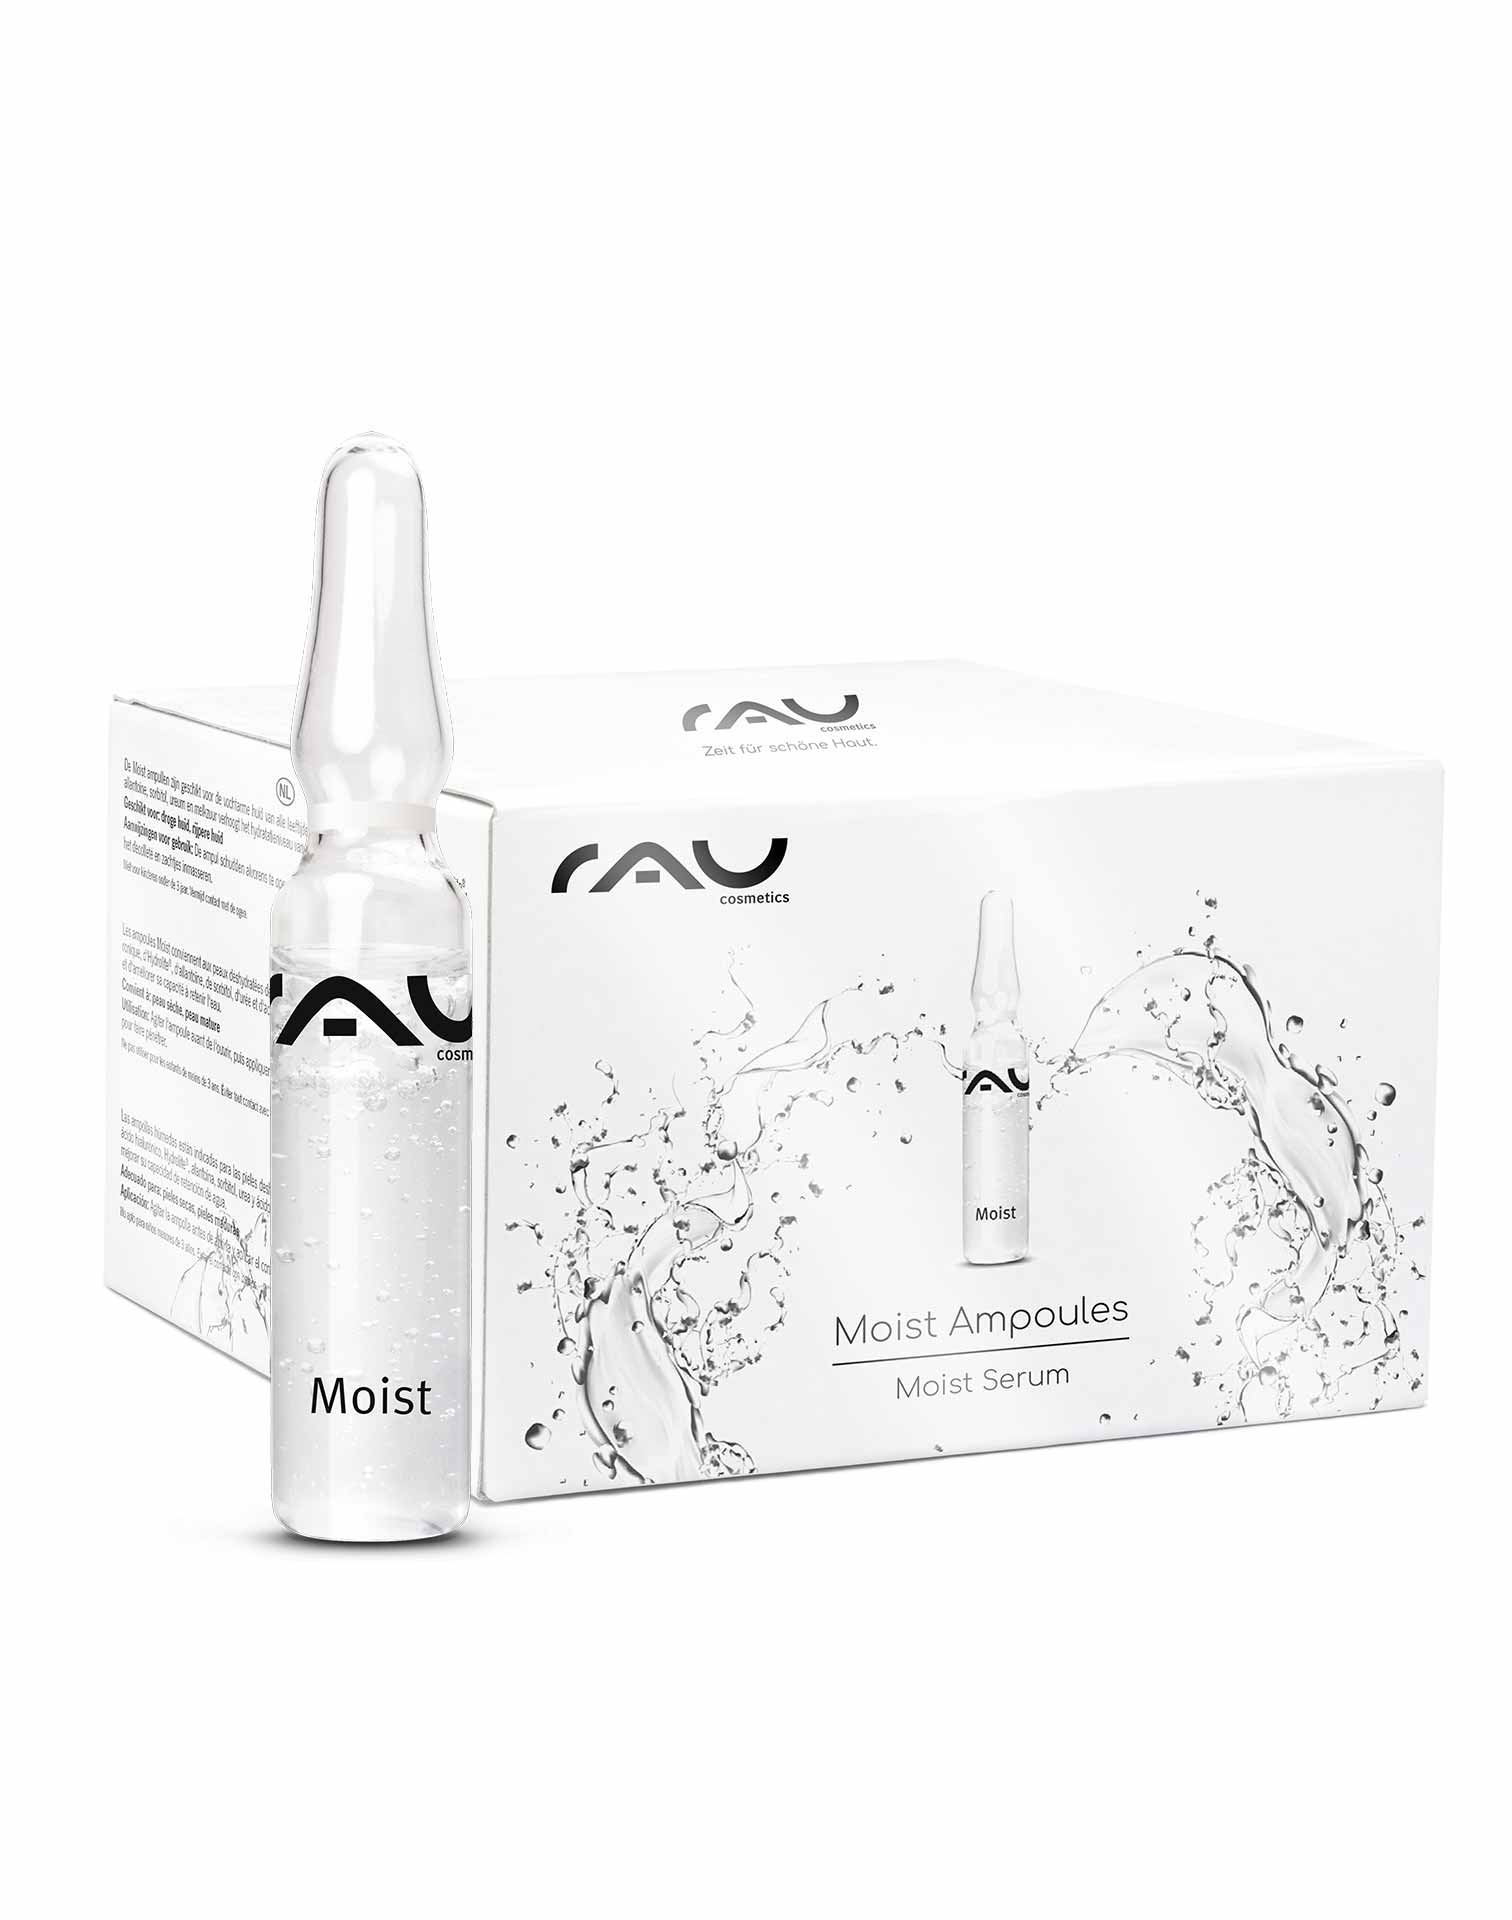 Moist ampoules 14x2 ml with Hydrolite for moisture